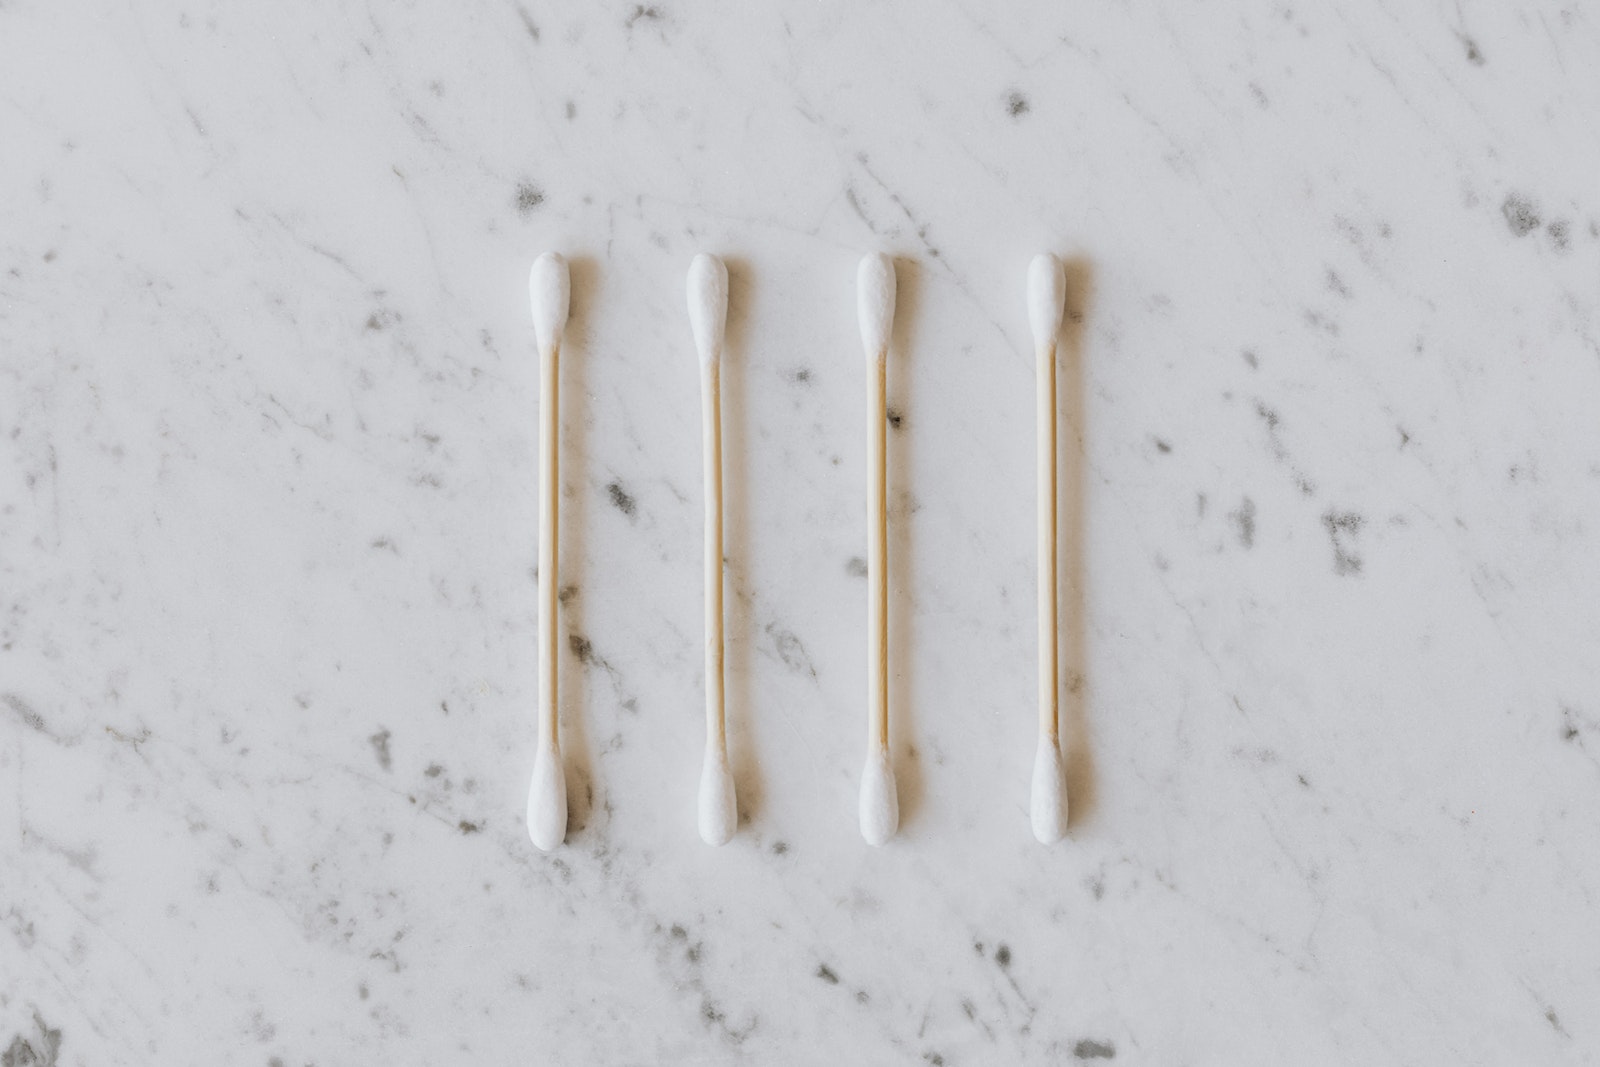 Top view of identical cotton swabs on thin wooden sticks with soft rounded edges on marble surface with tiny spots and gray lines